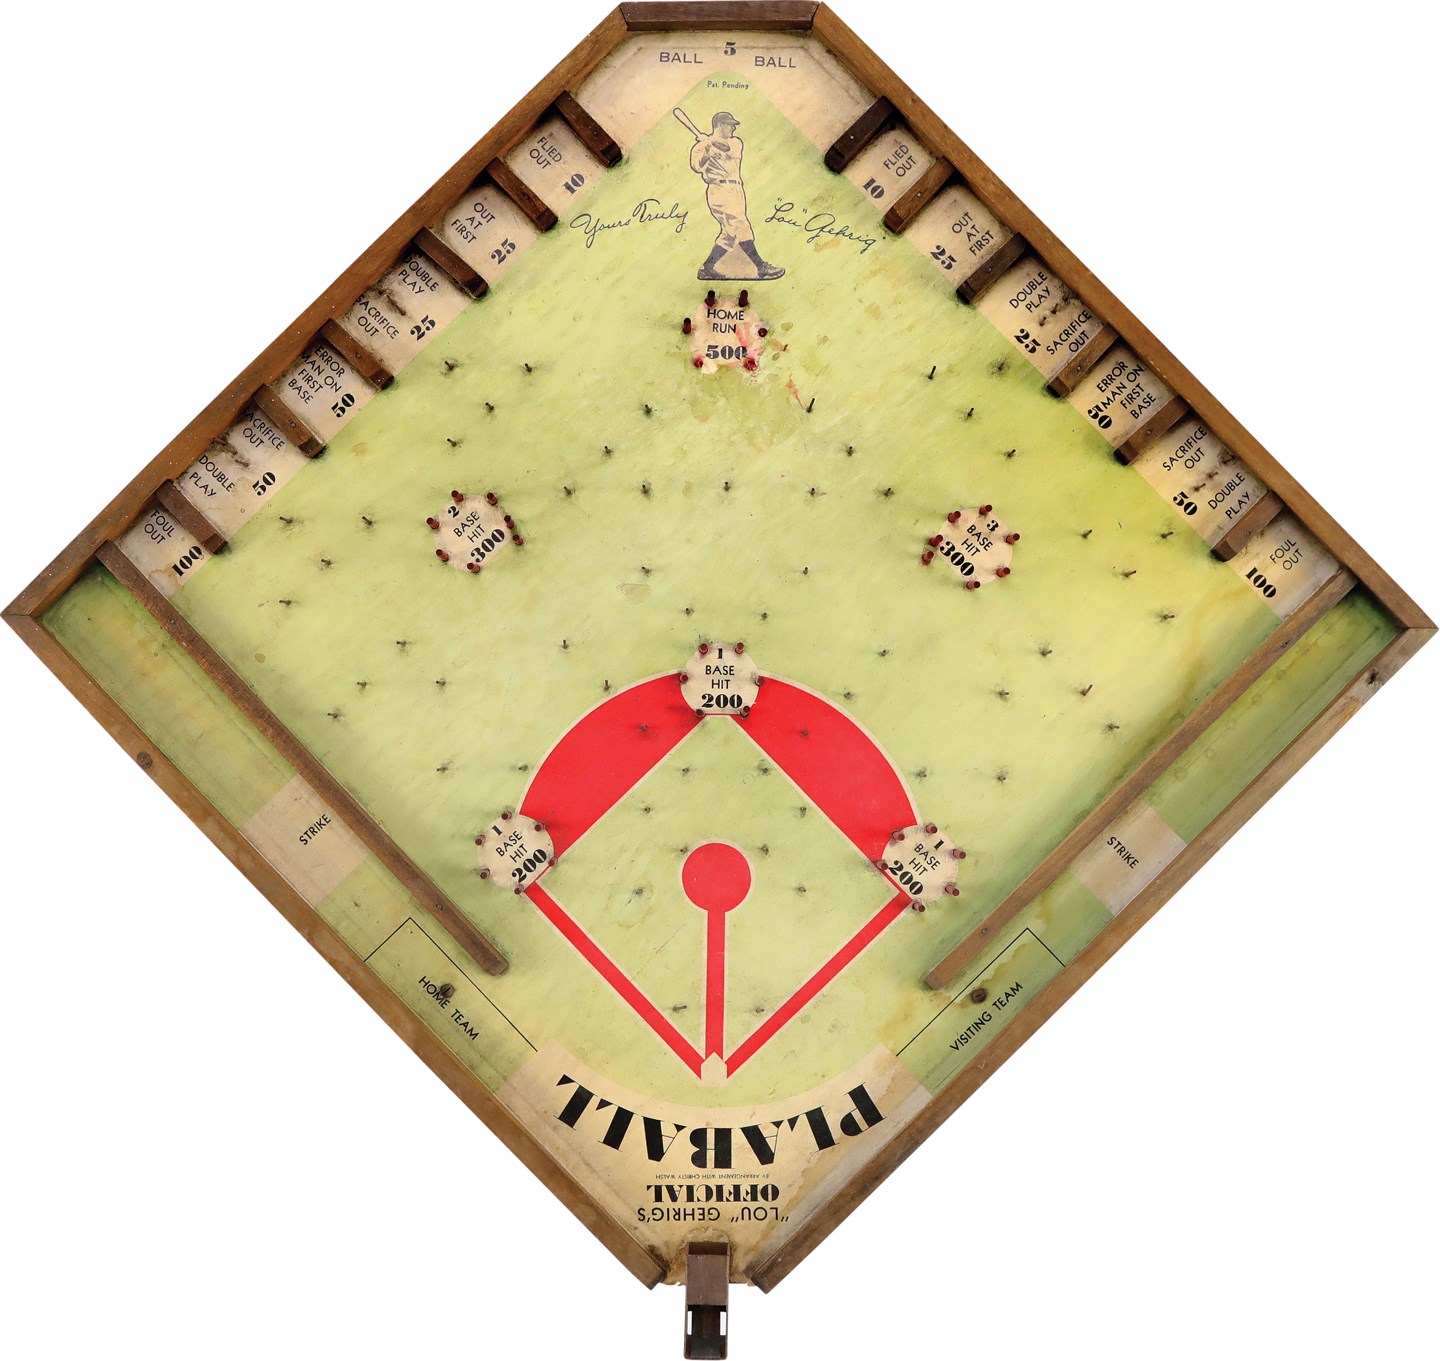 1932 "Lou Gehrig's Official PLABALL" Game